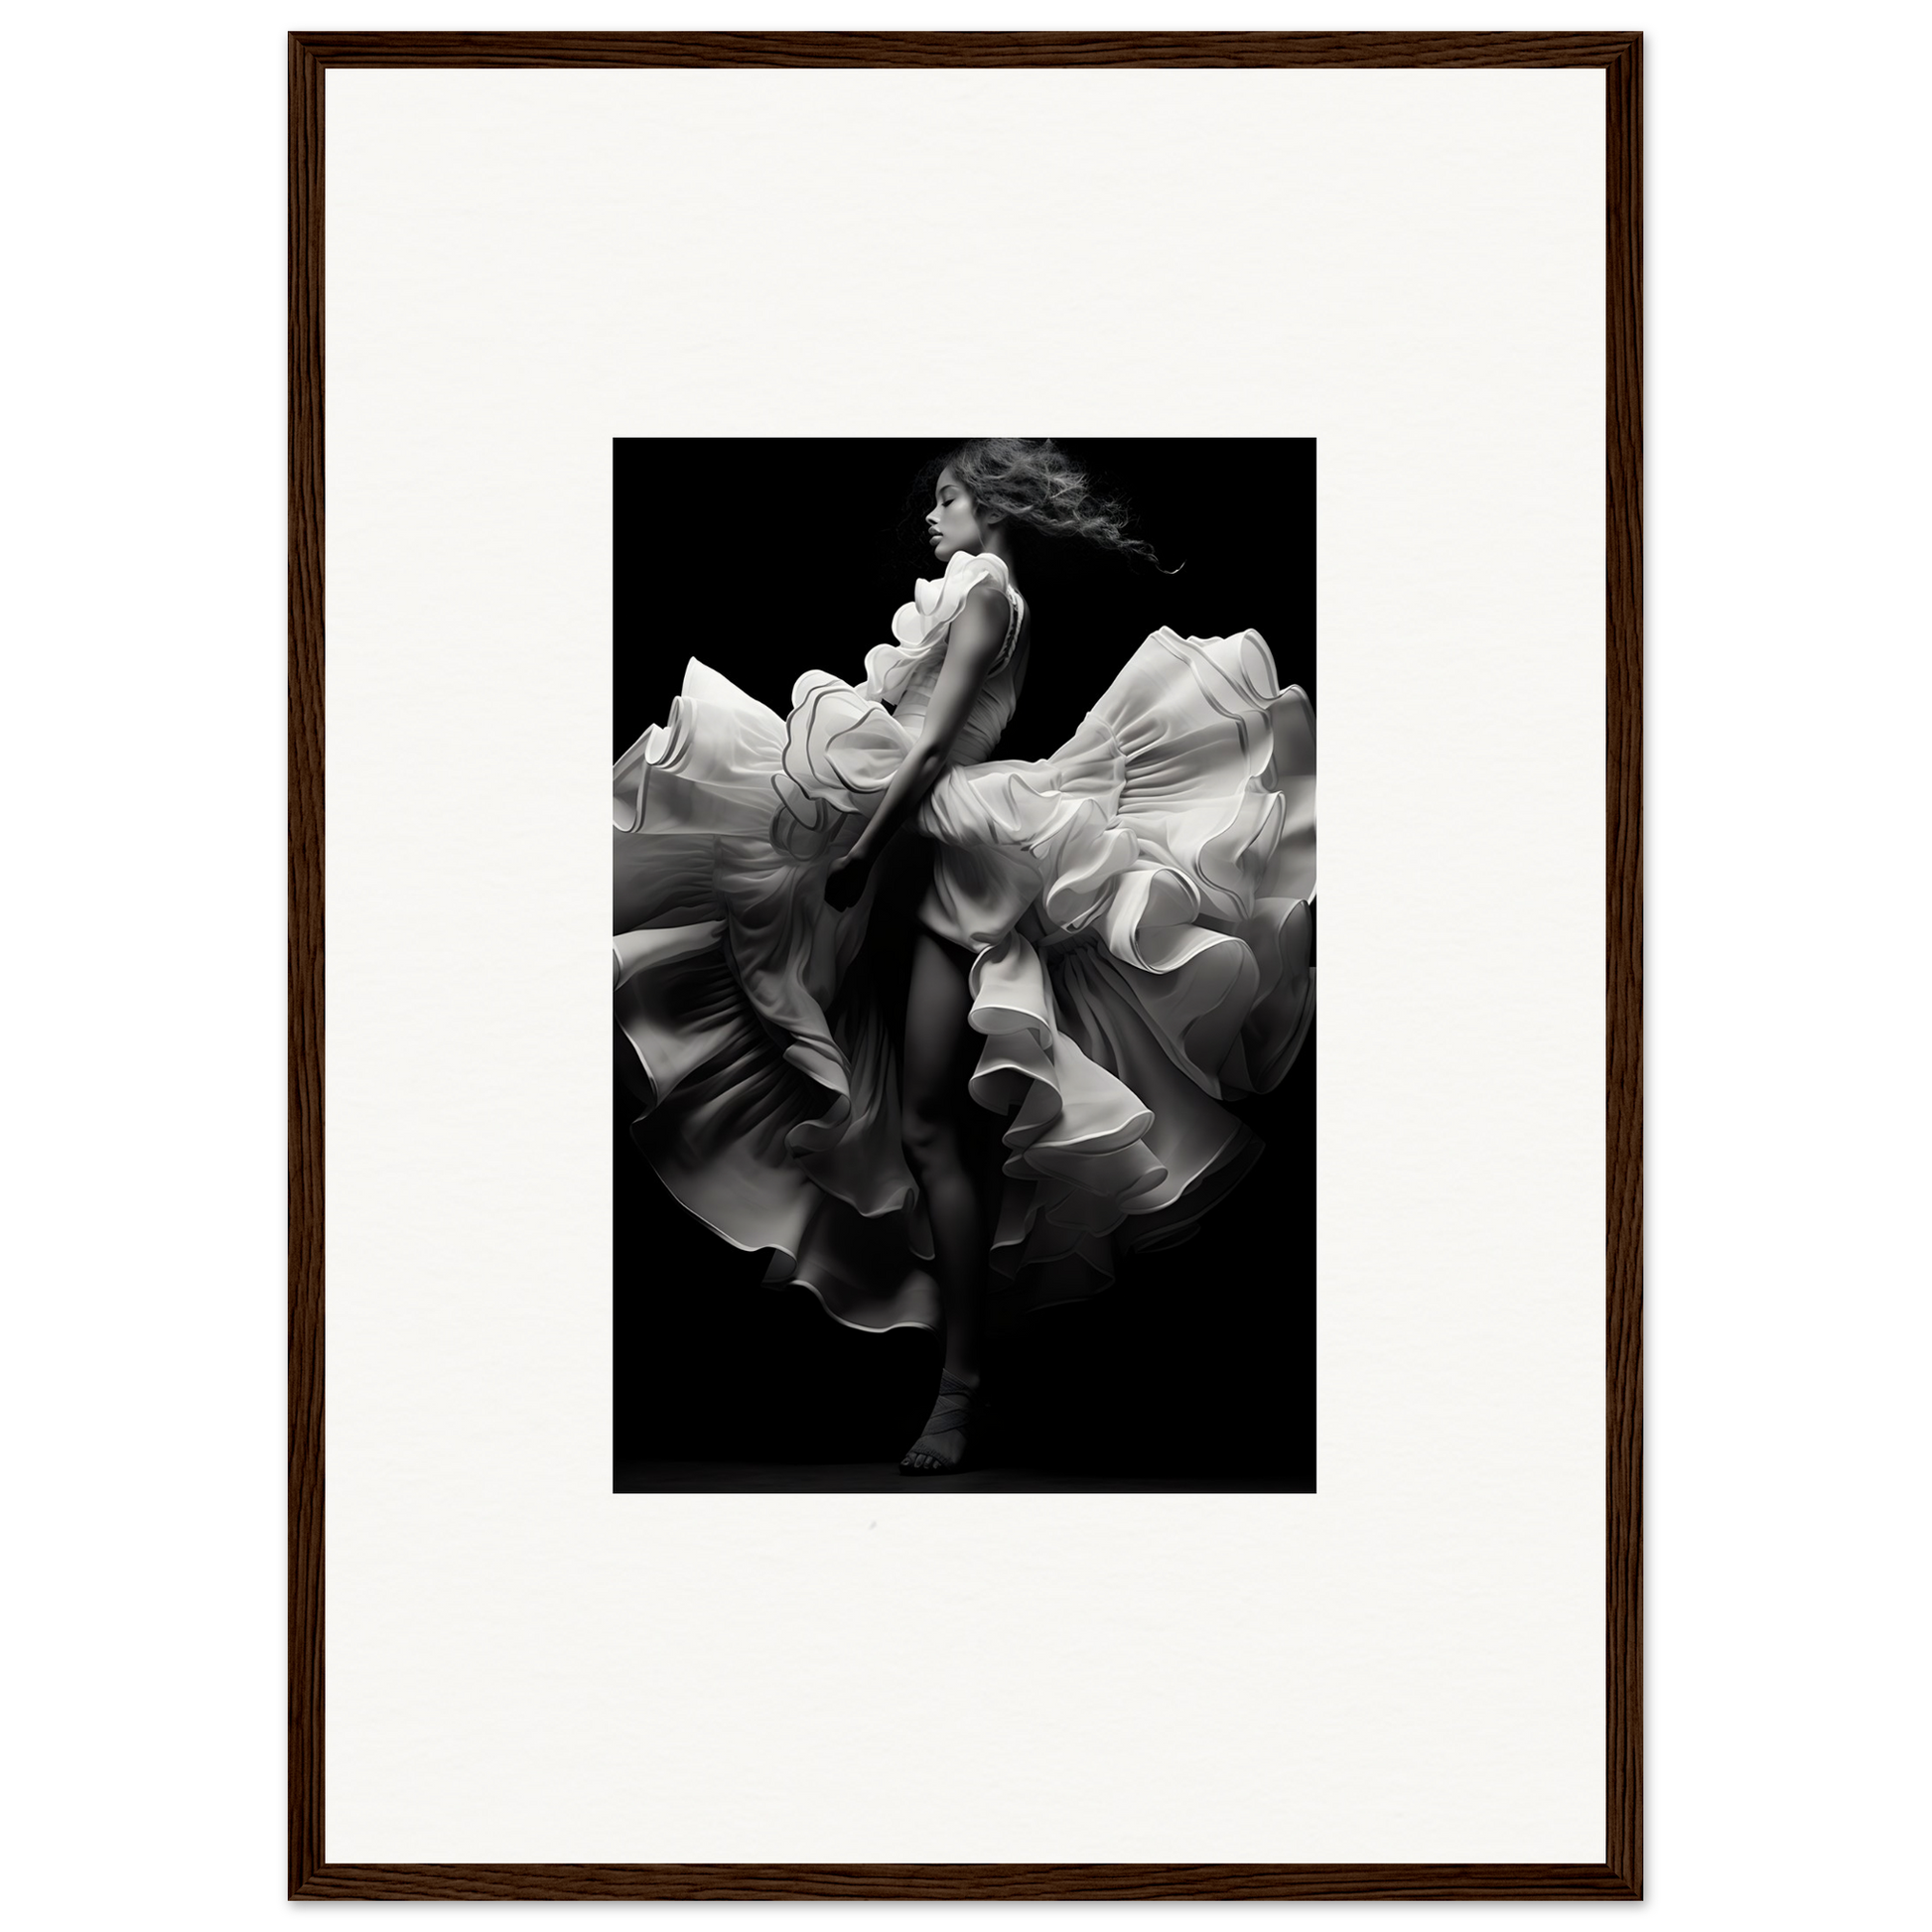 Dancers and time 05p - framed poster - 50x70 cm / 20x28″ /